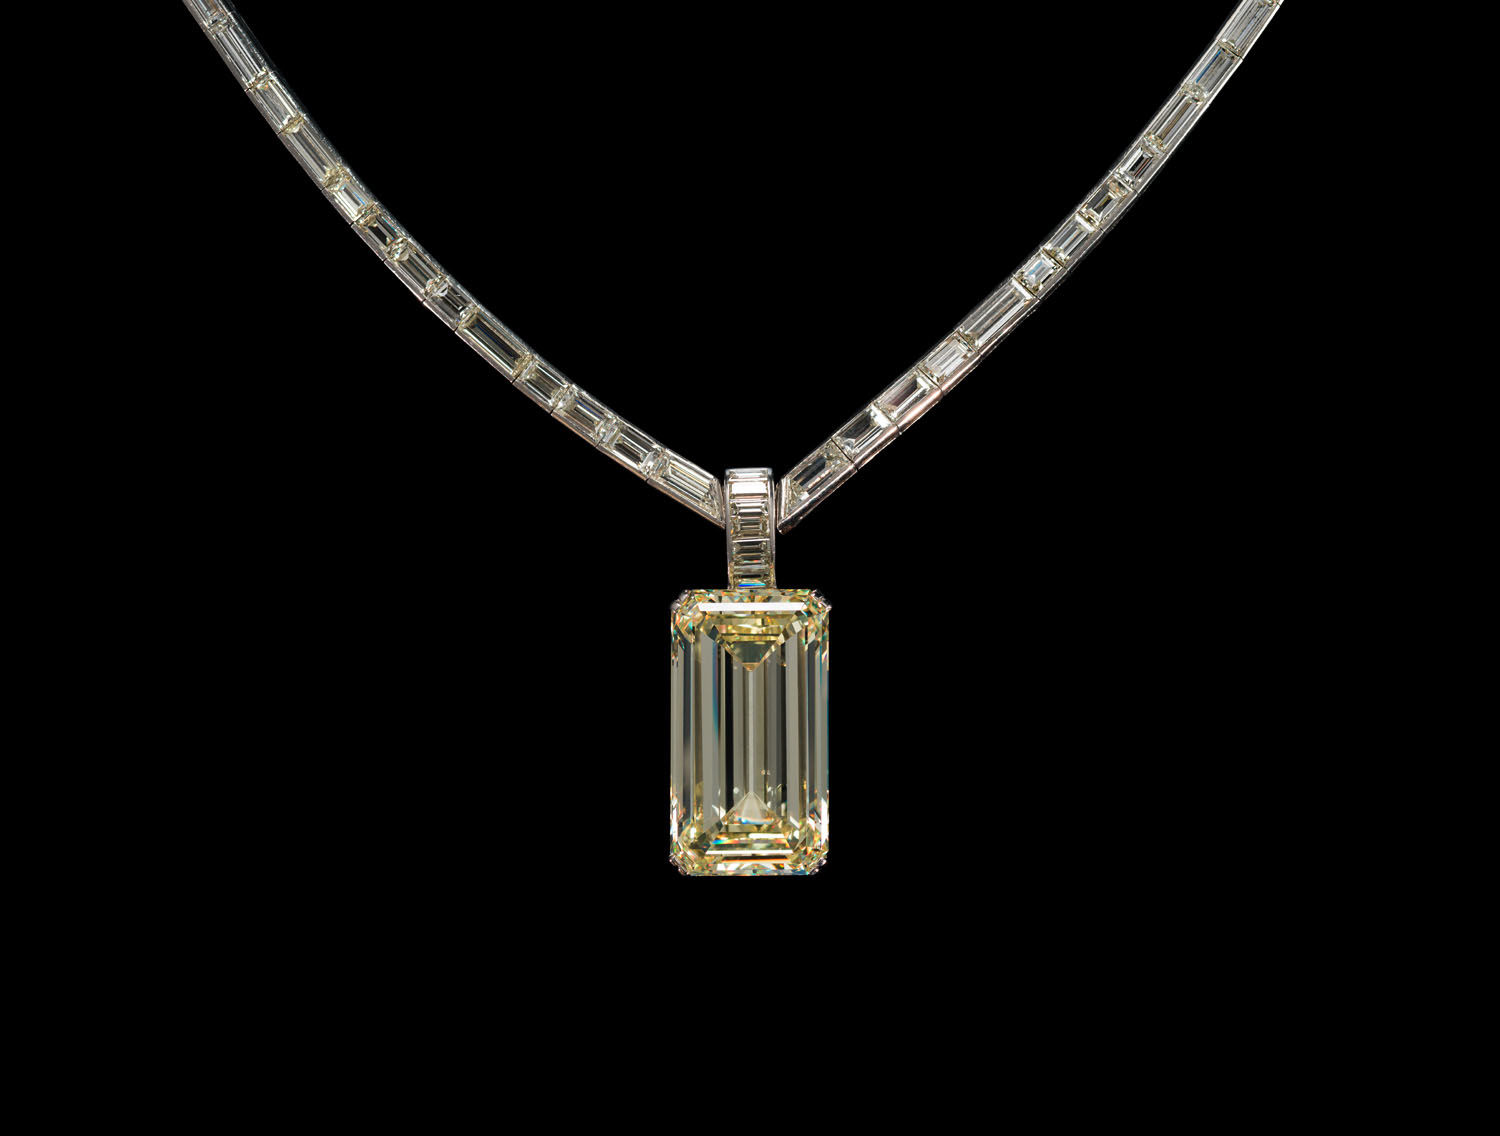 Kimberly Diamond set in a necklace